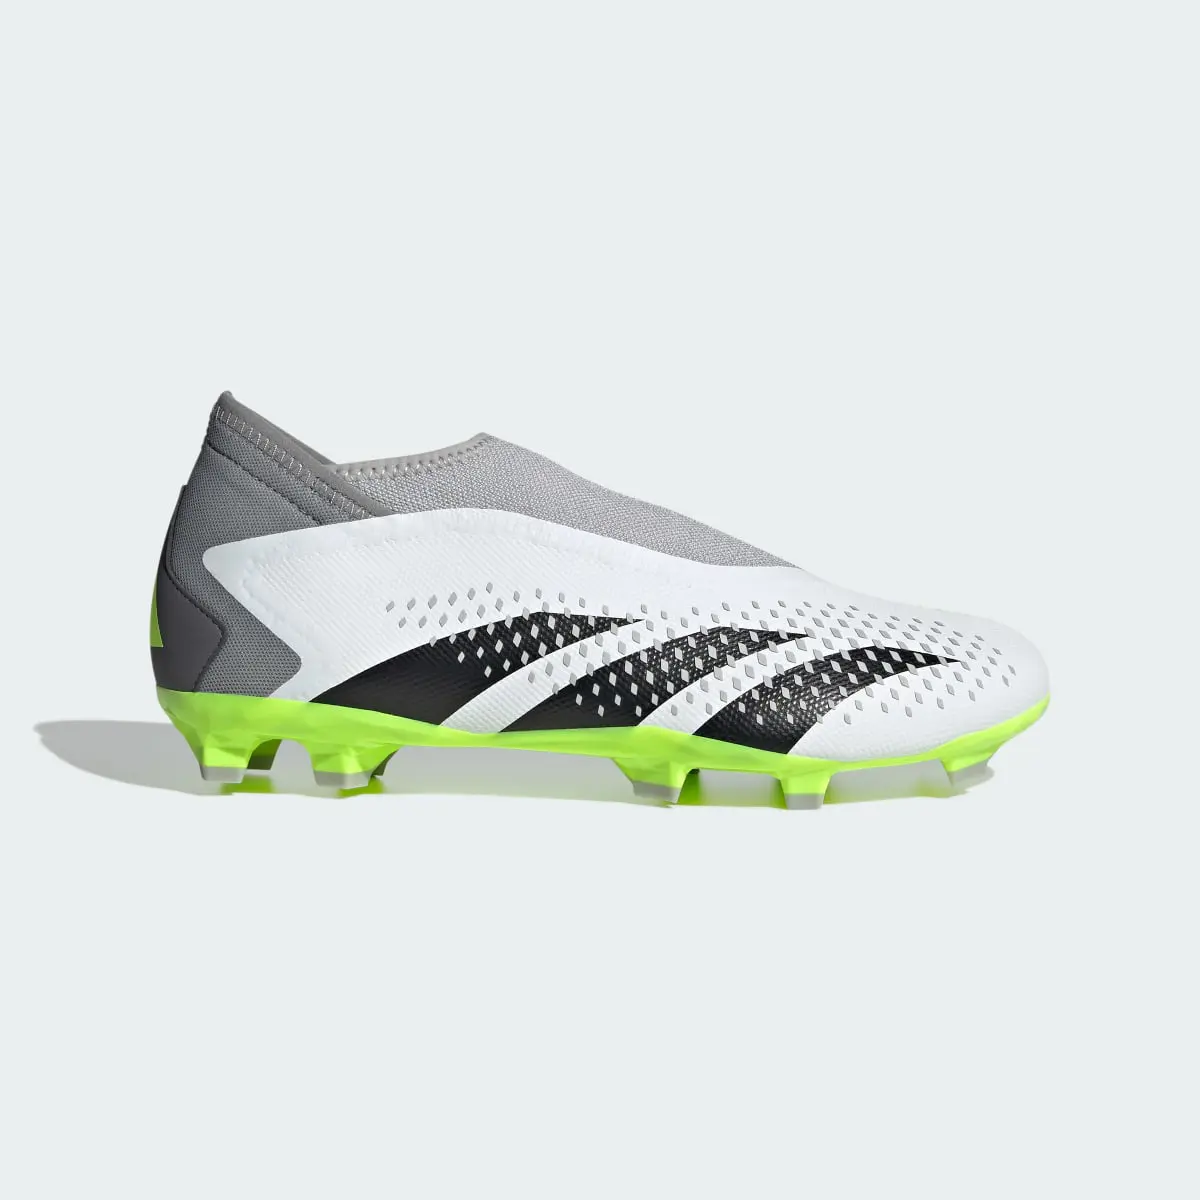 Adidas Predator Accuracy.3 Laceless Firm Ground Cleats. 2